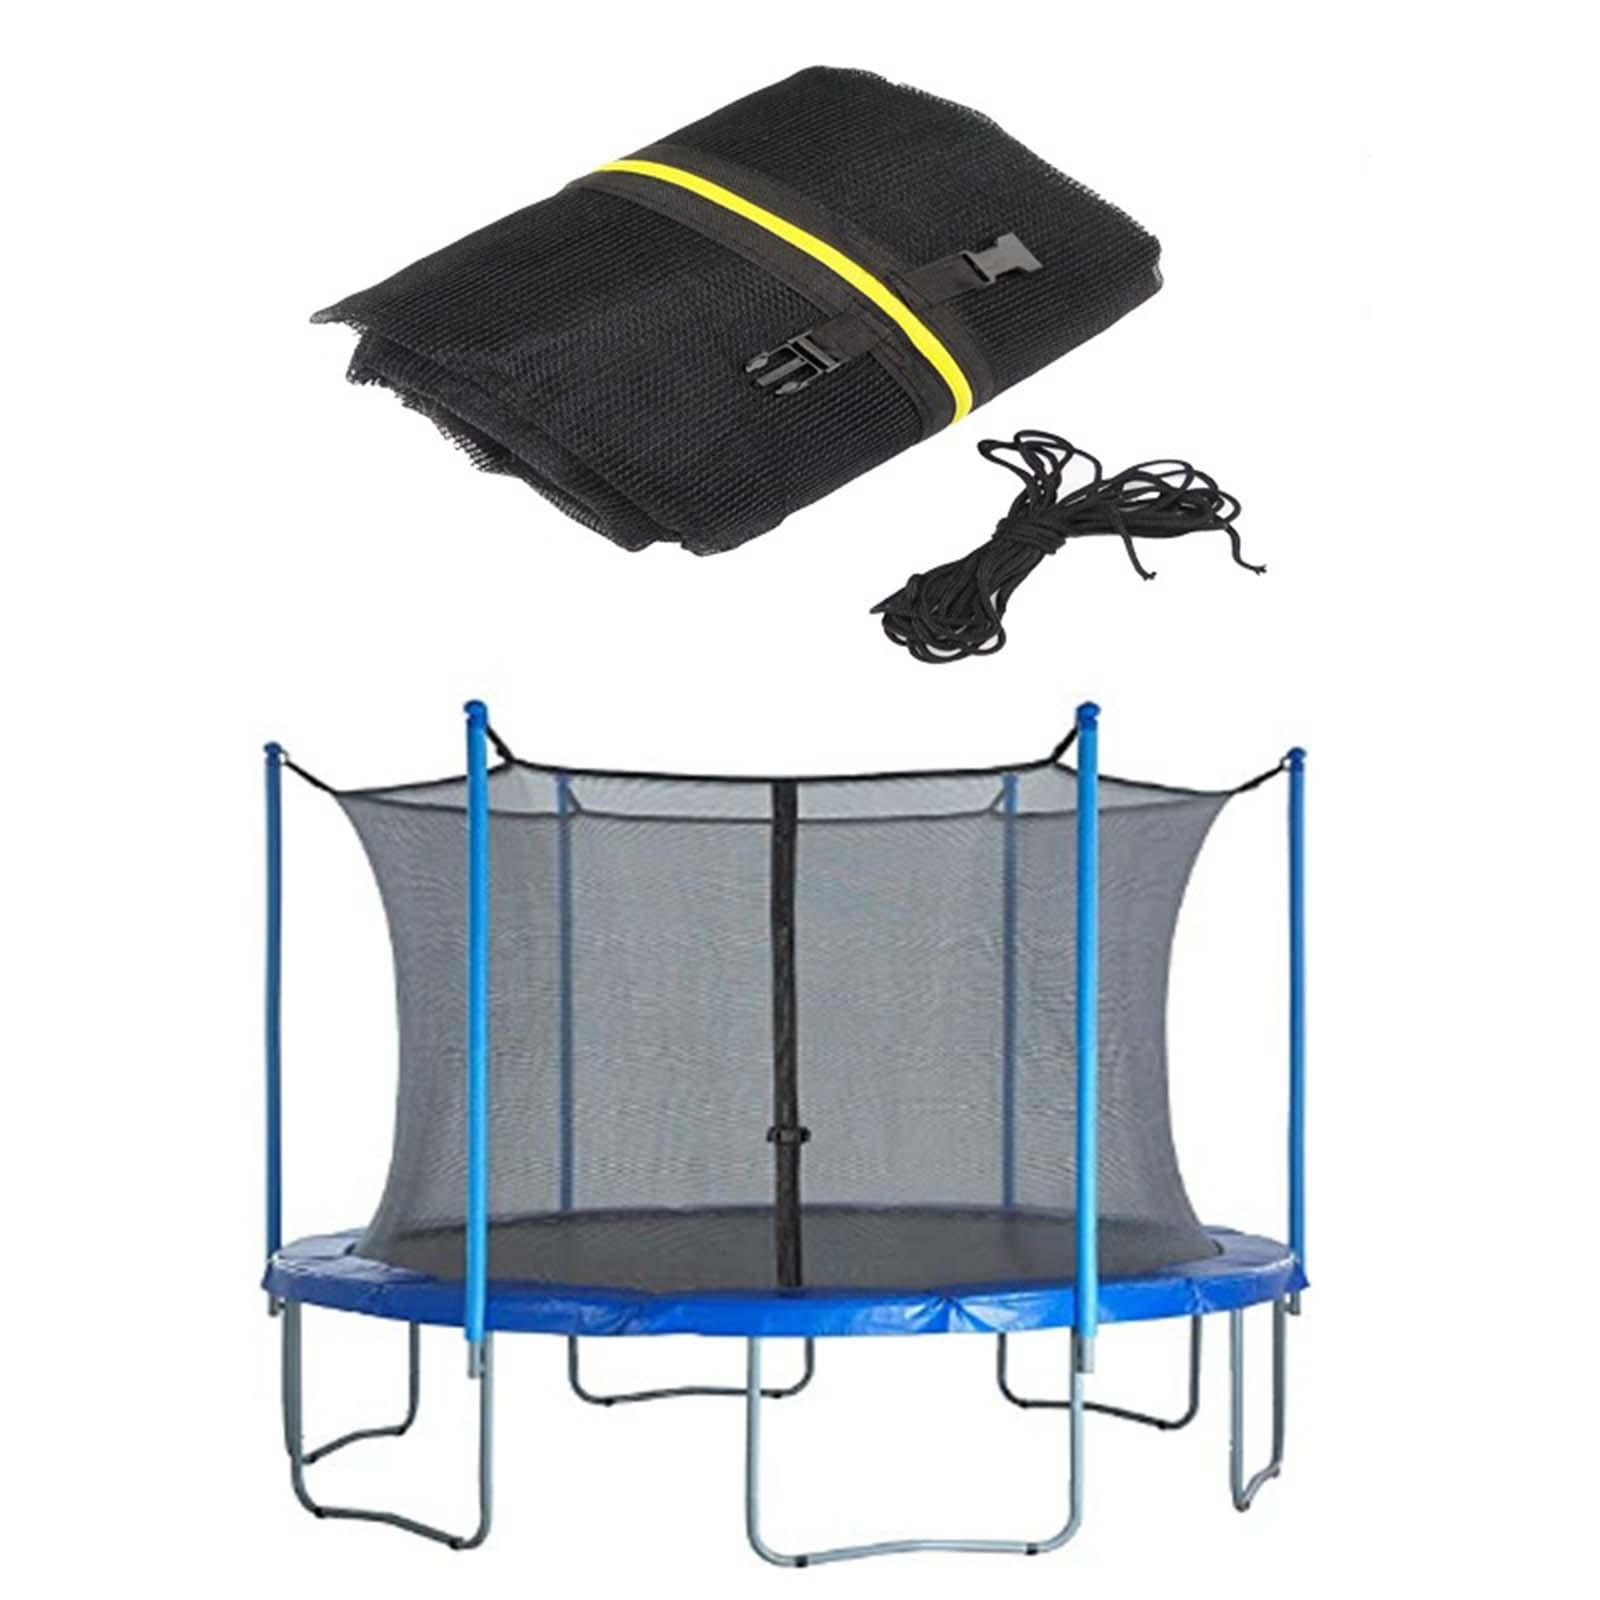 New Sportspower 12 ft x 8 ft Outdoor Kids Trampoline Replacement Spare Parts net 